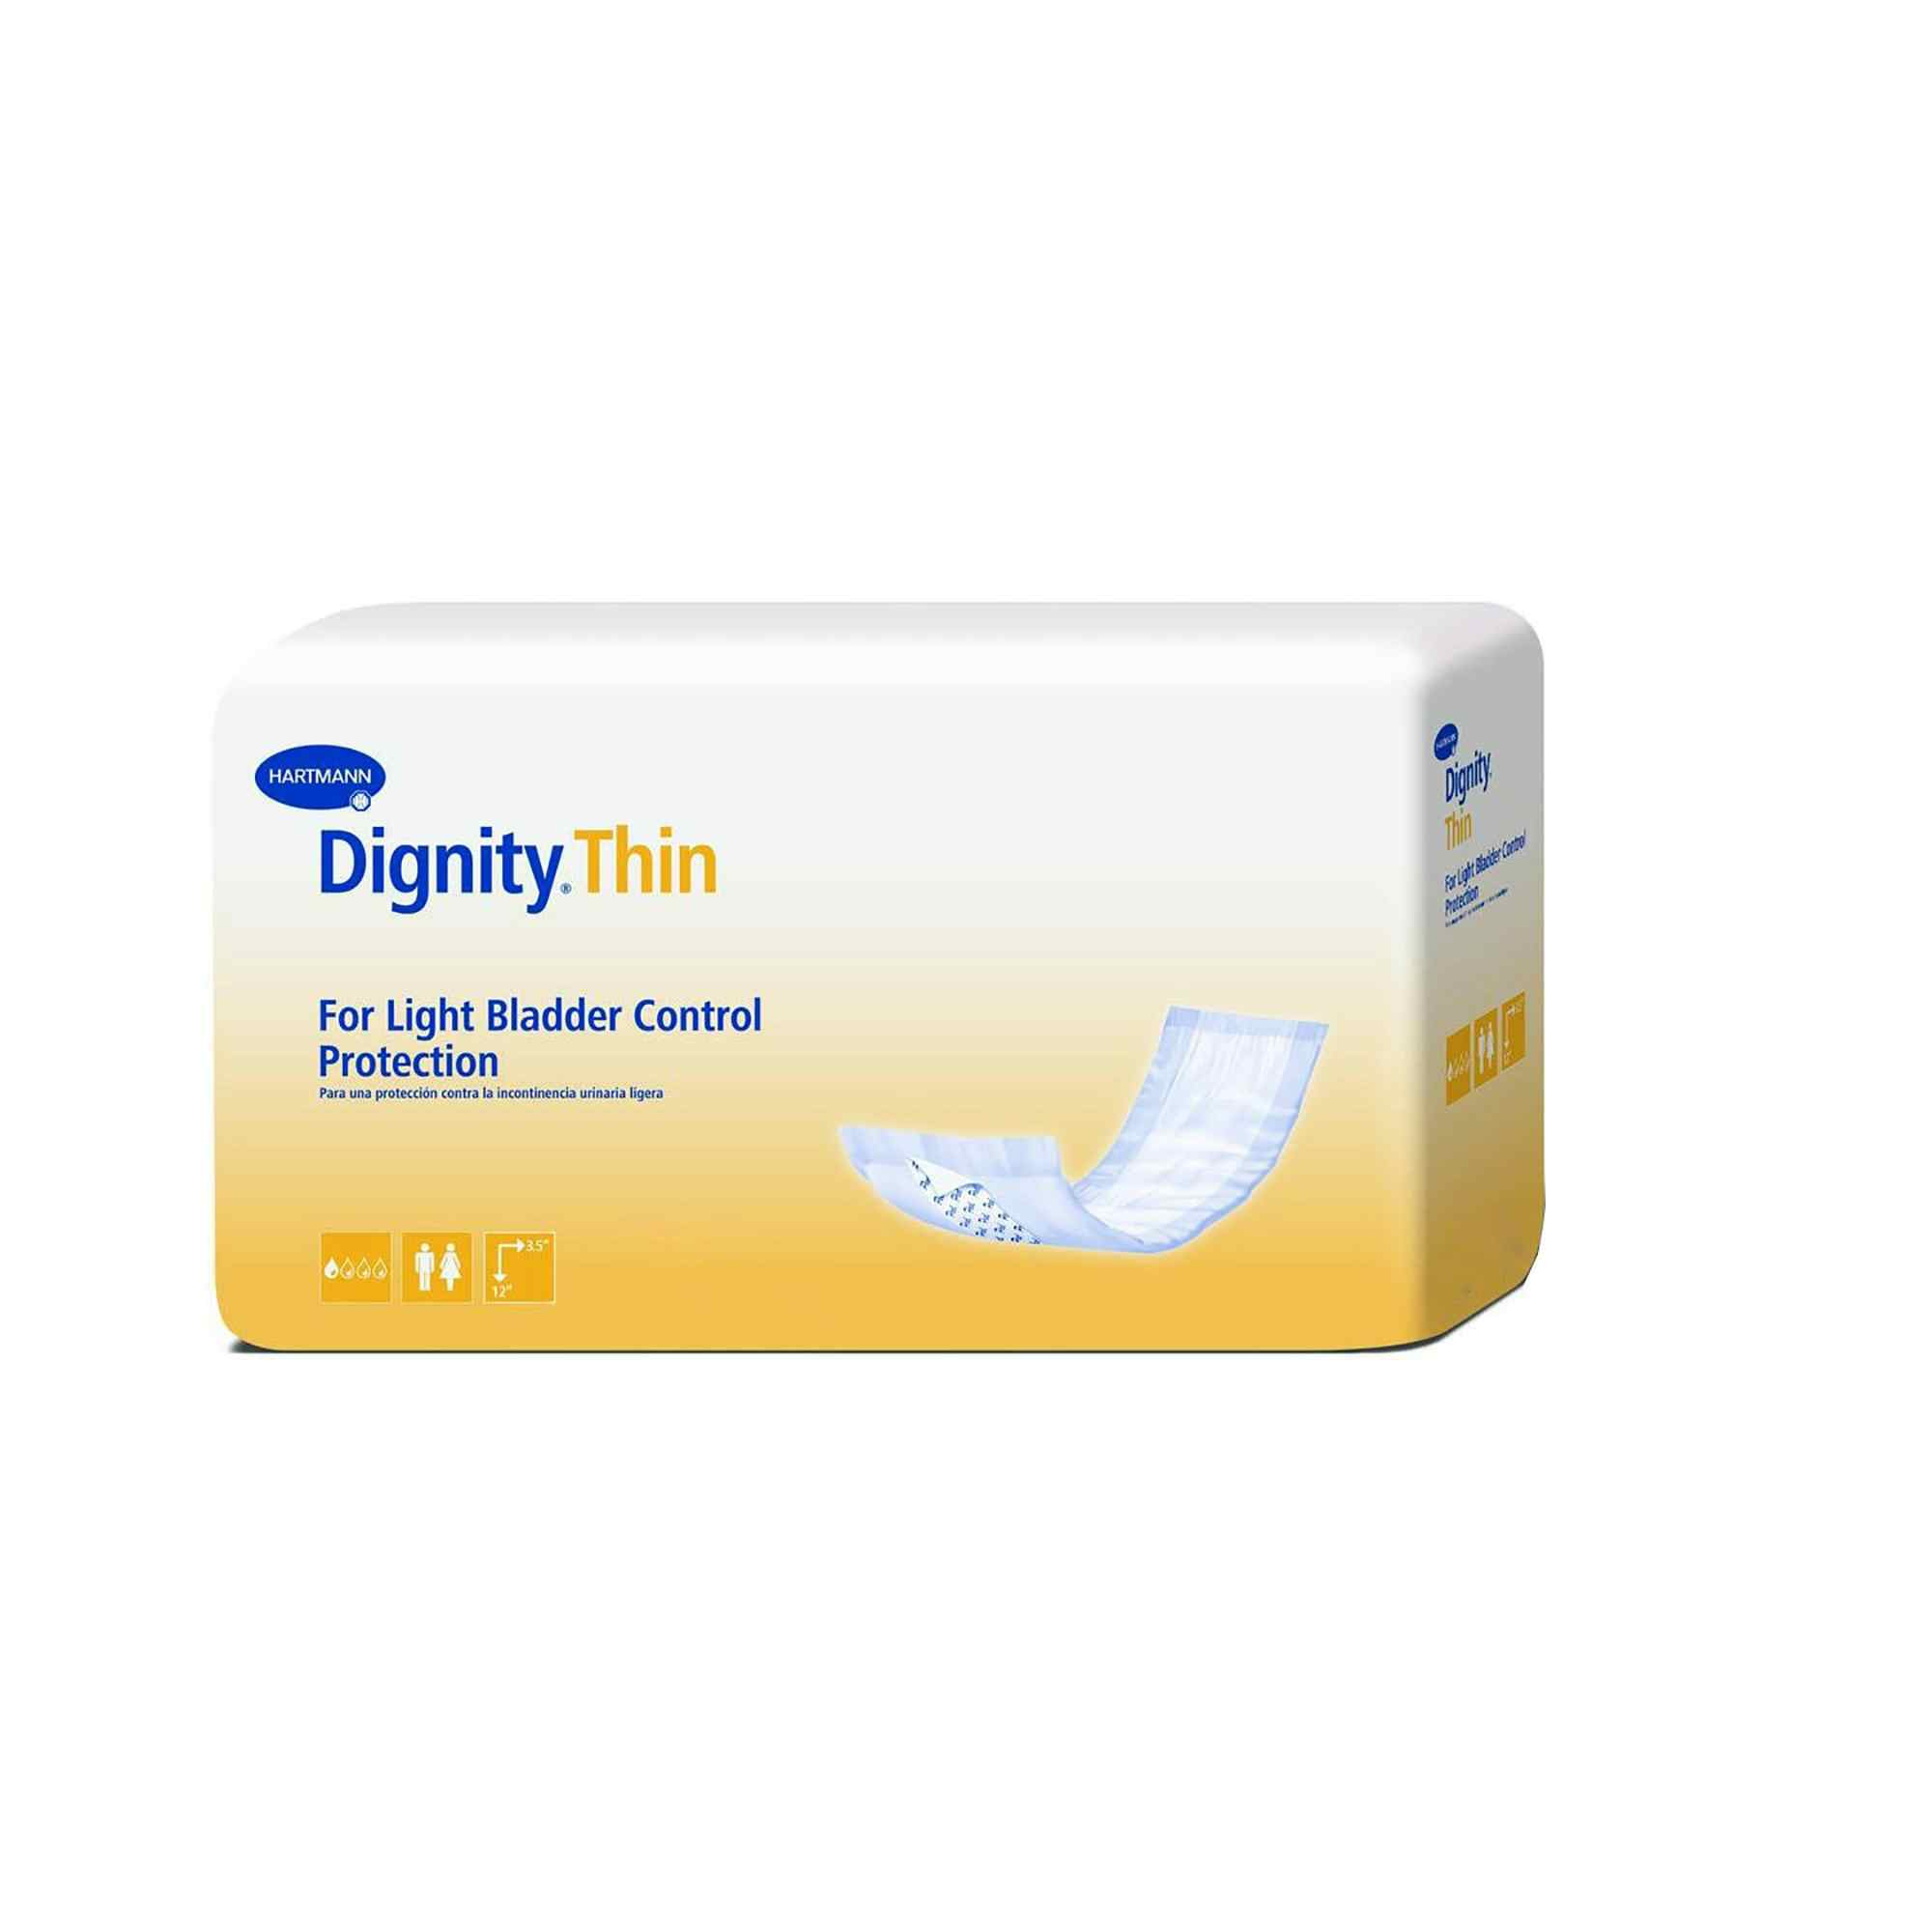 Dignity Thin Adult Unisex Disposable Bladder Control Pad, Light Absorbency